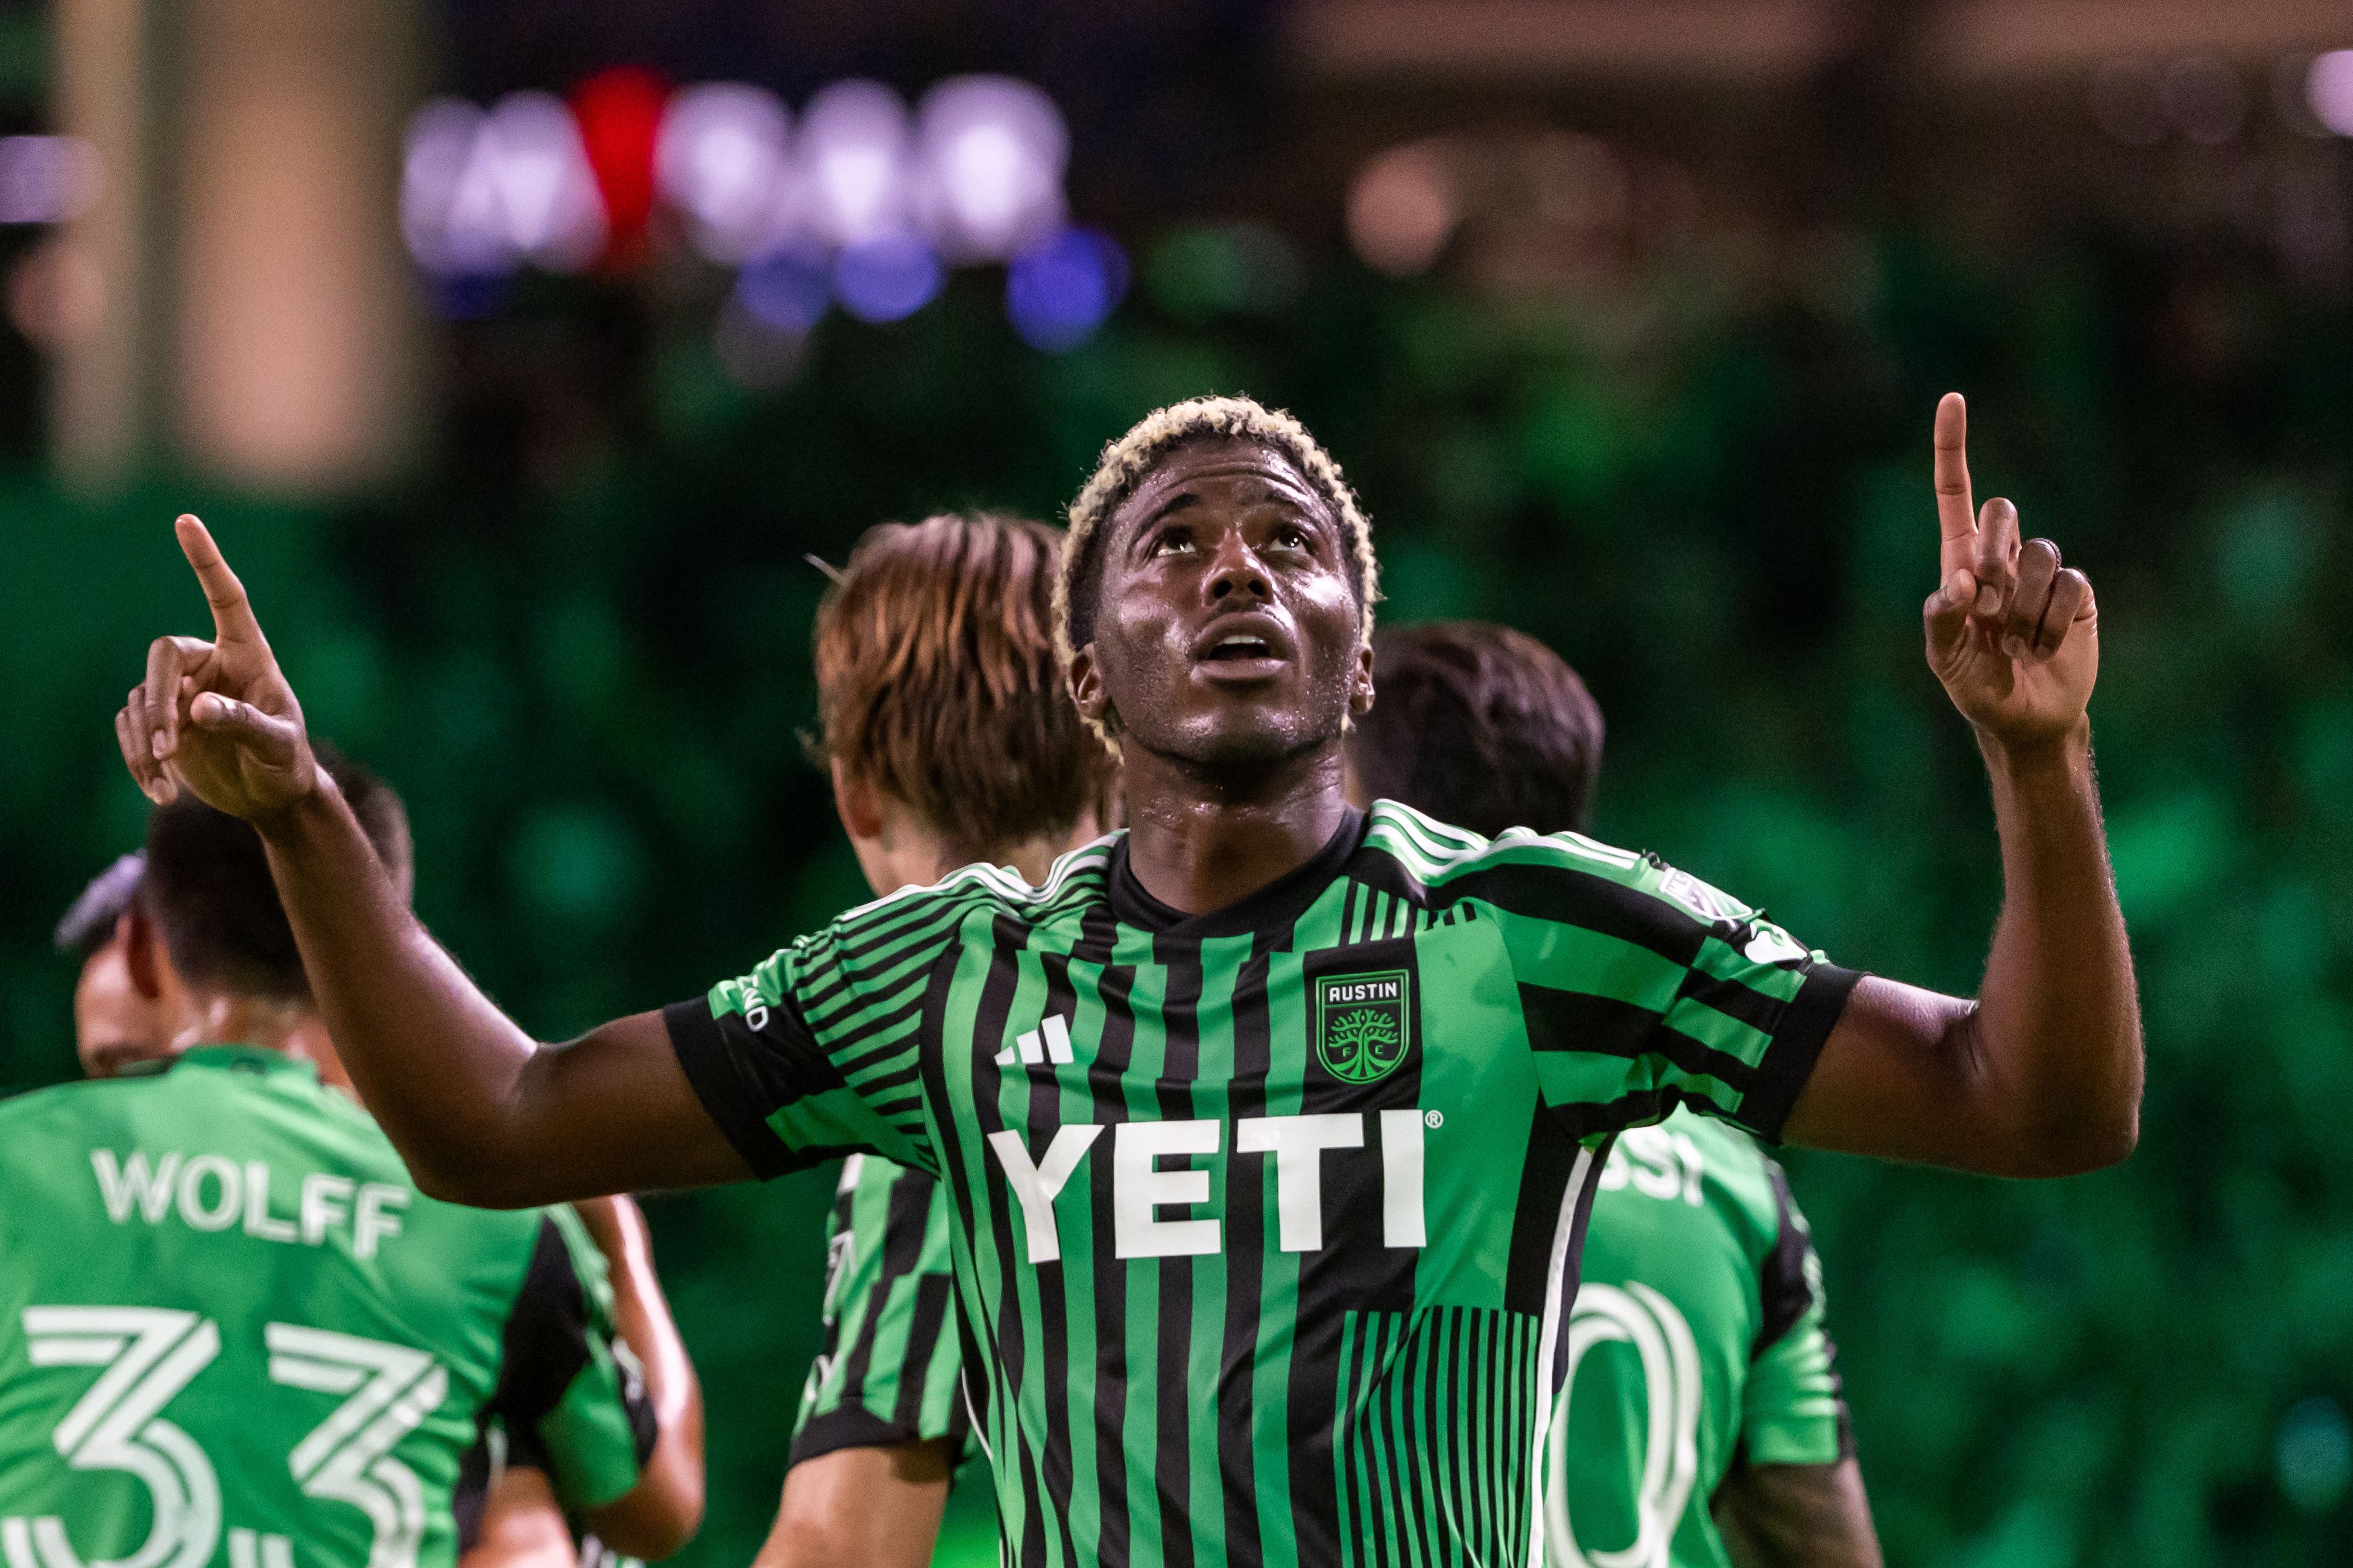 Austin FC forward Gyasi Zardes (9) looks to the crowd after scoring a goal during the MLS match between Austin FC and Sporting Kansas City.